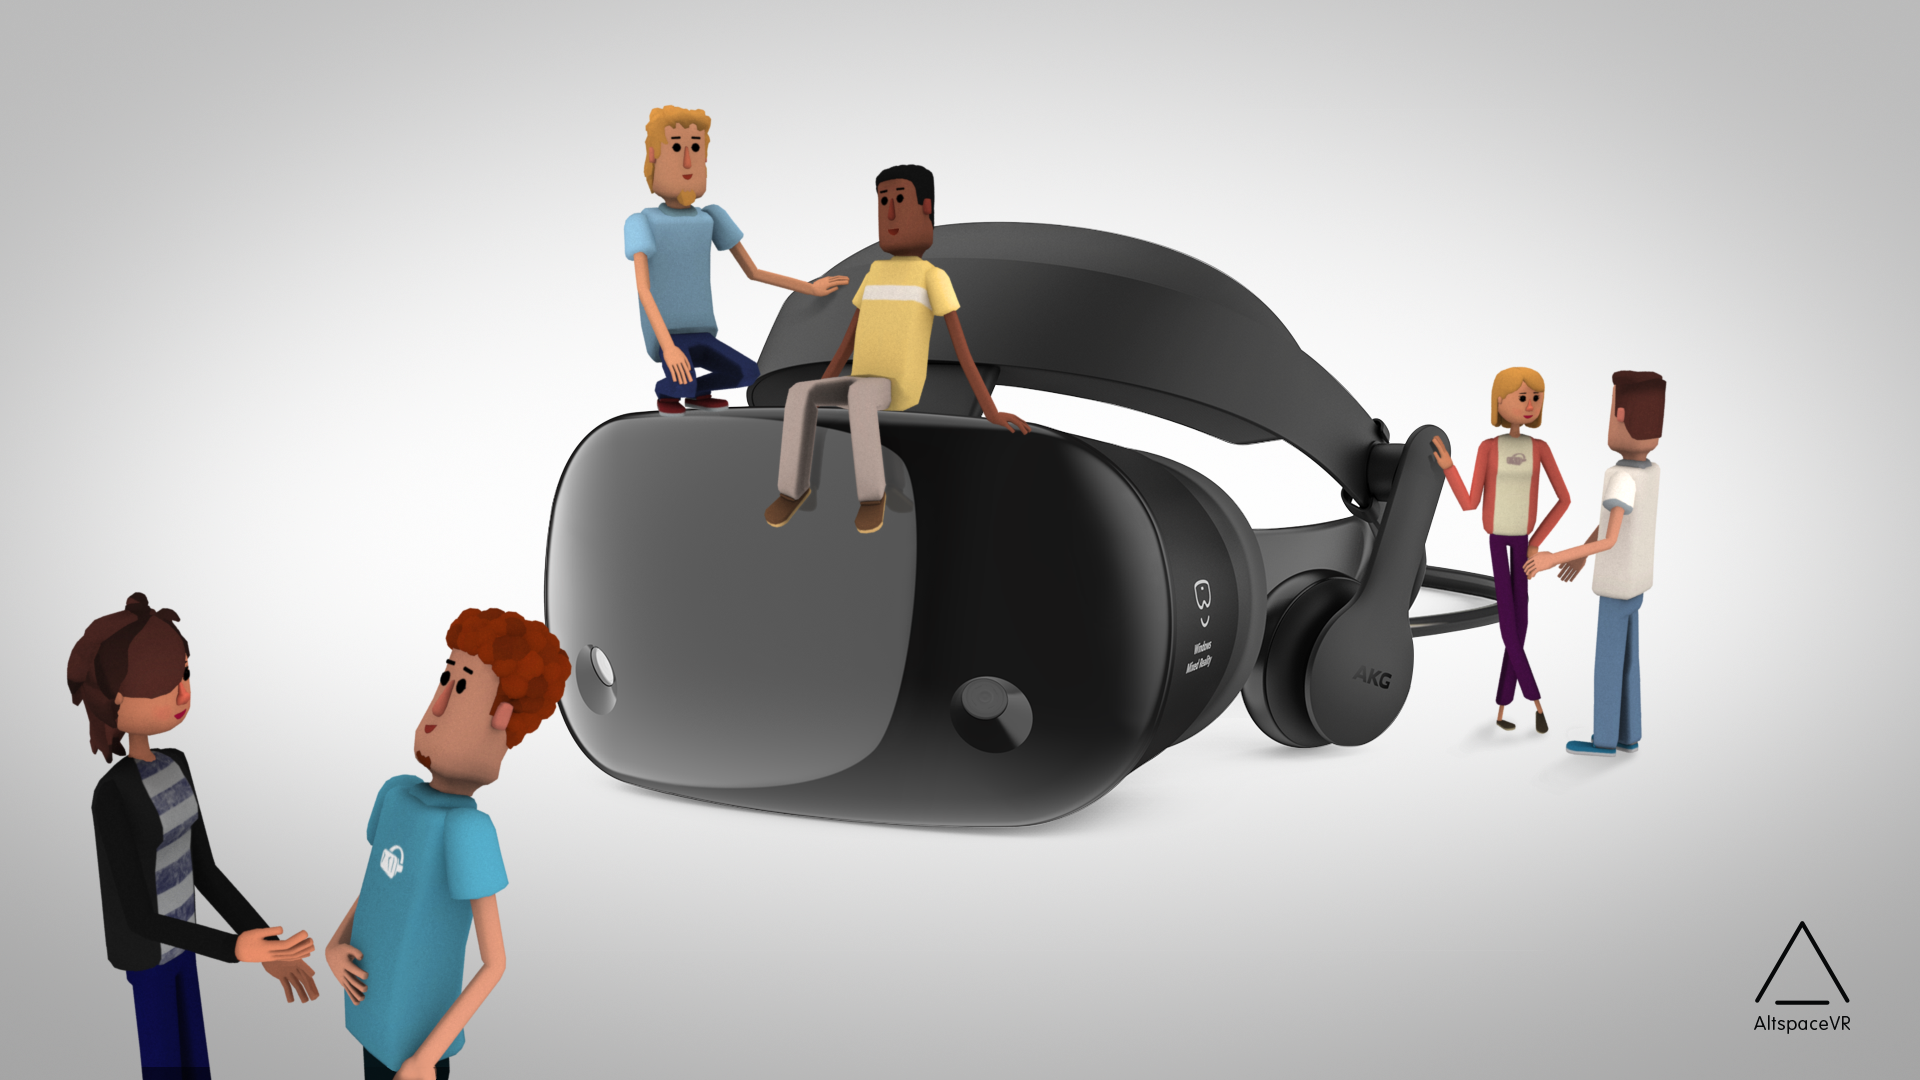 AltspaceVR is now part of Microsoft